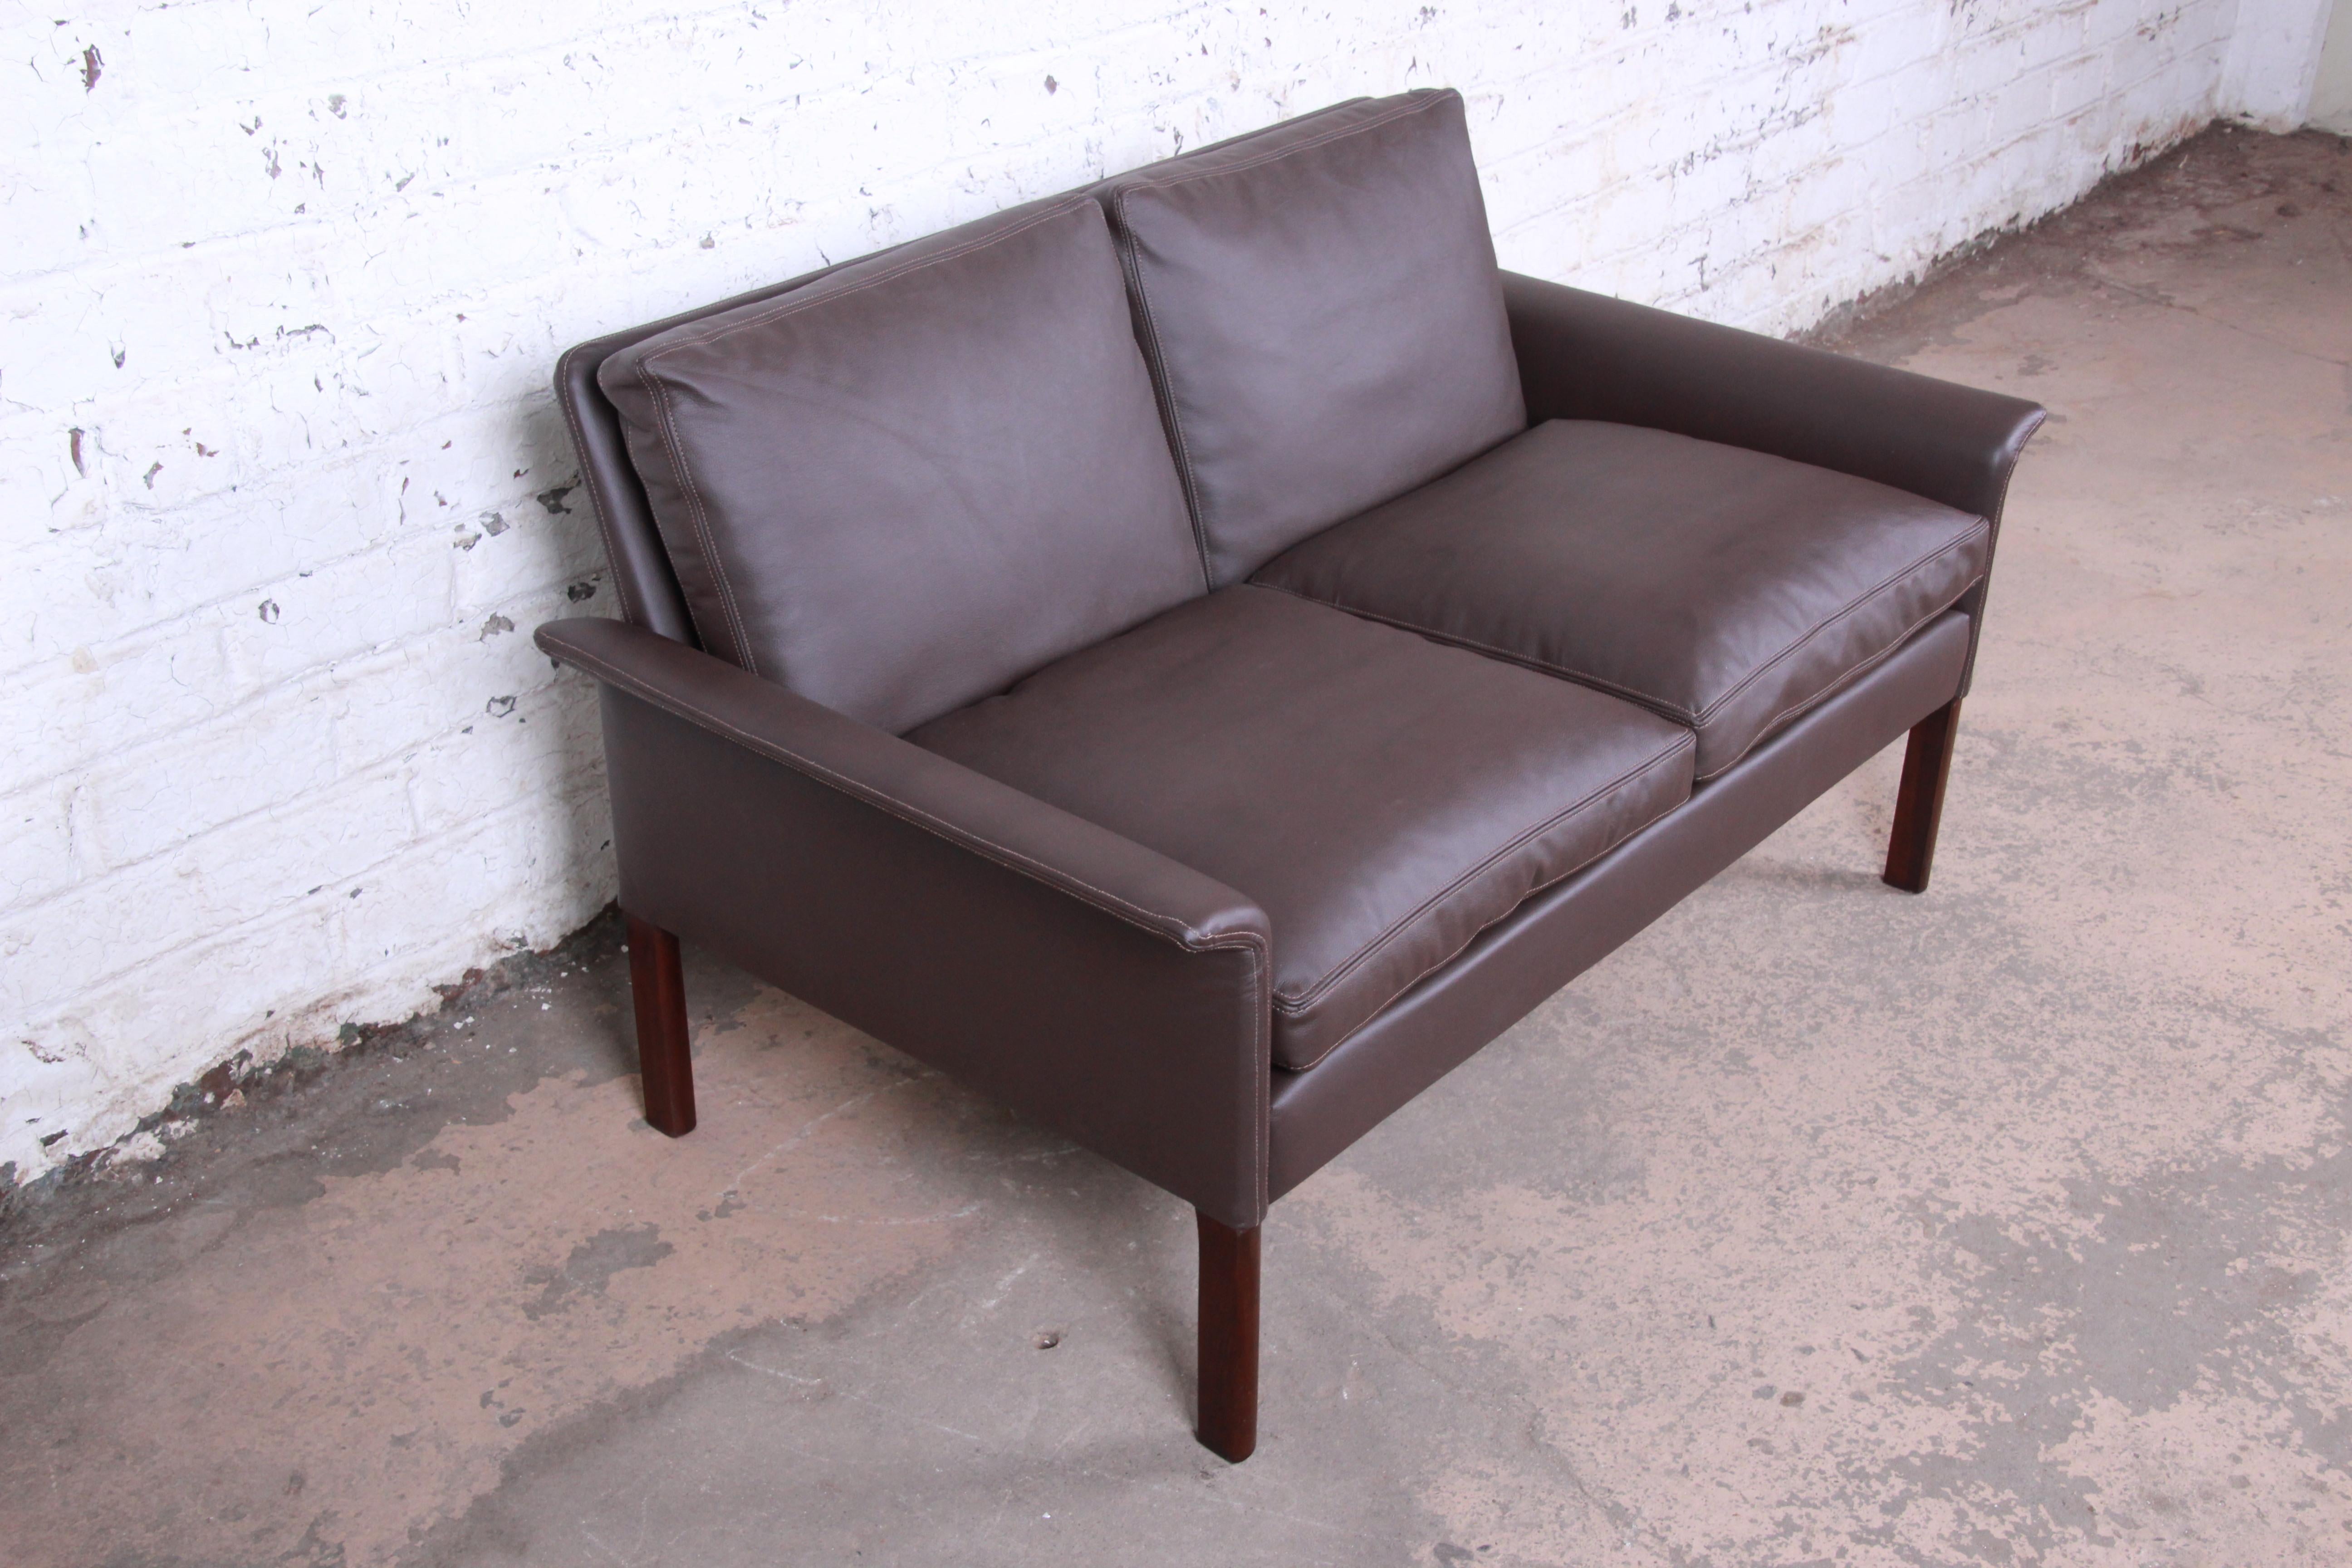 Mid-20th Century Hans Olsen Danish Modern Rosewood and Leather Settee, Fully Restored